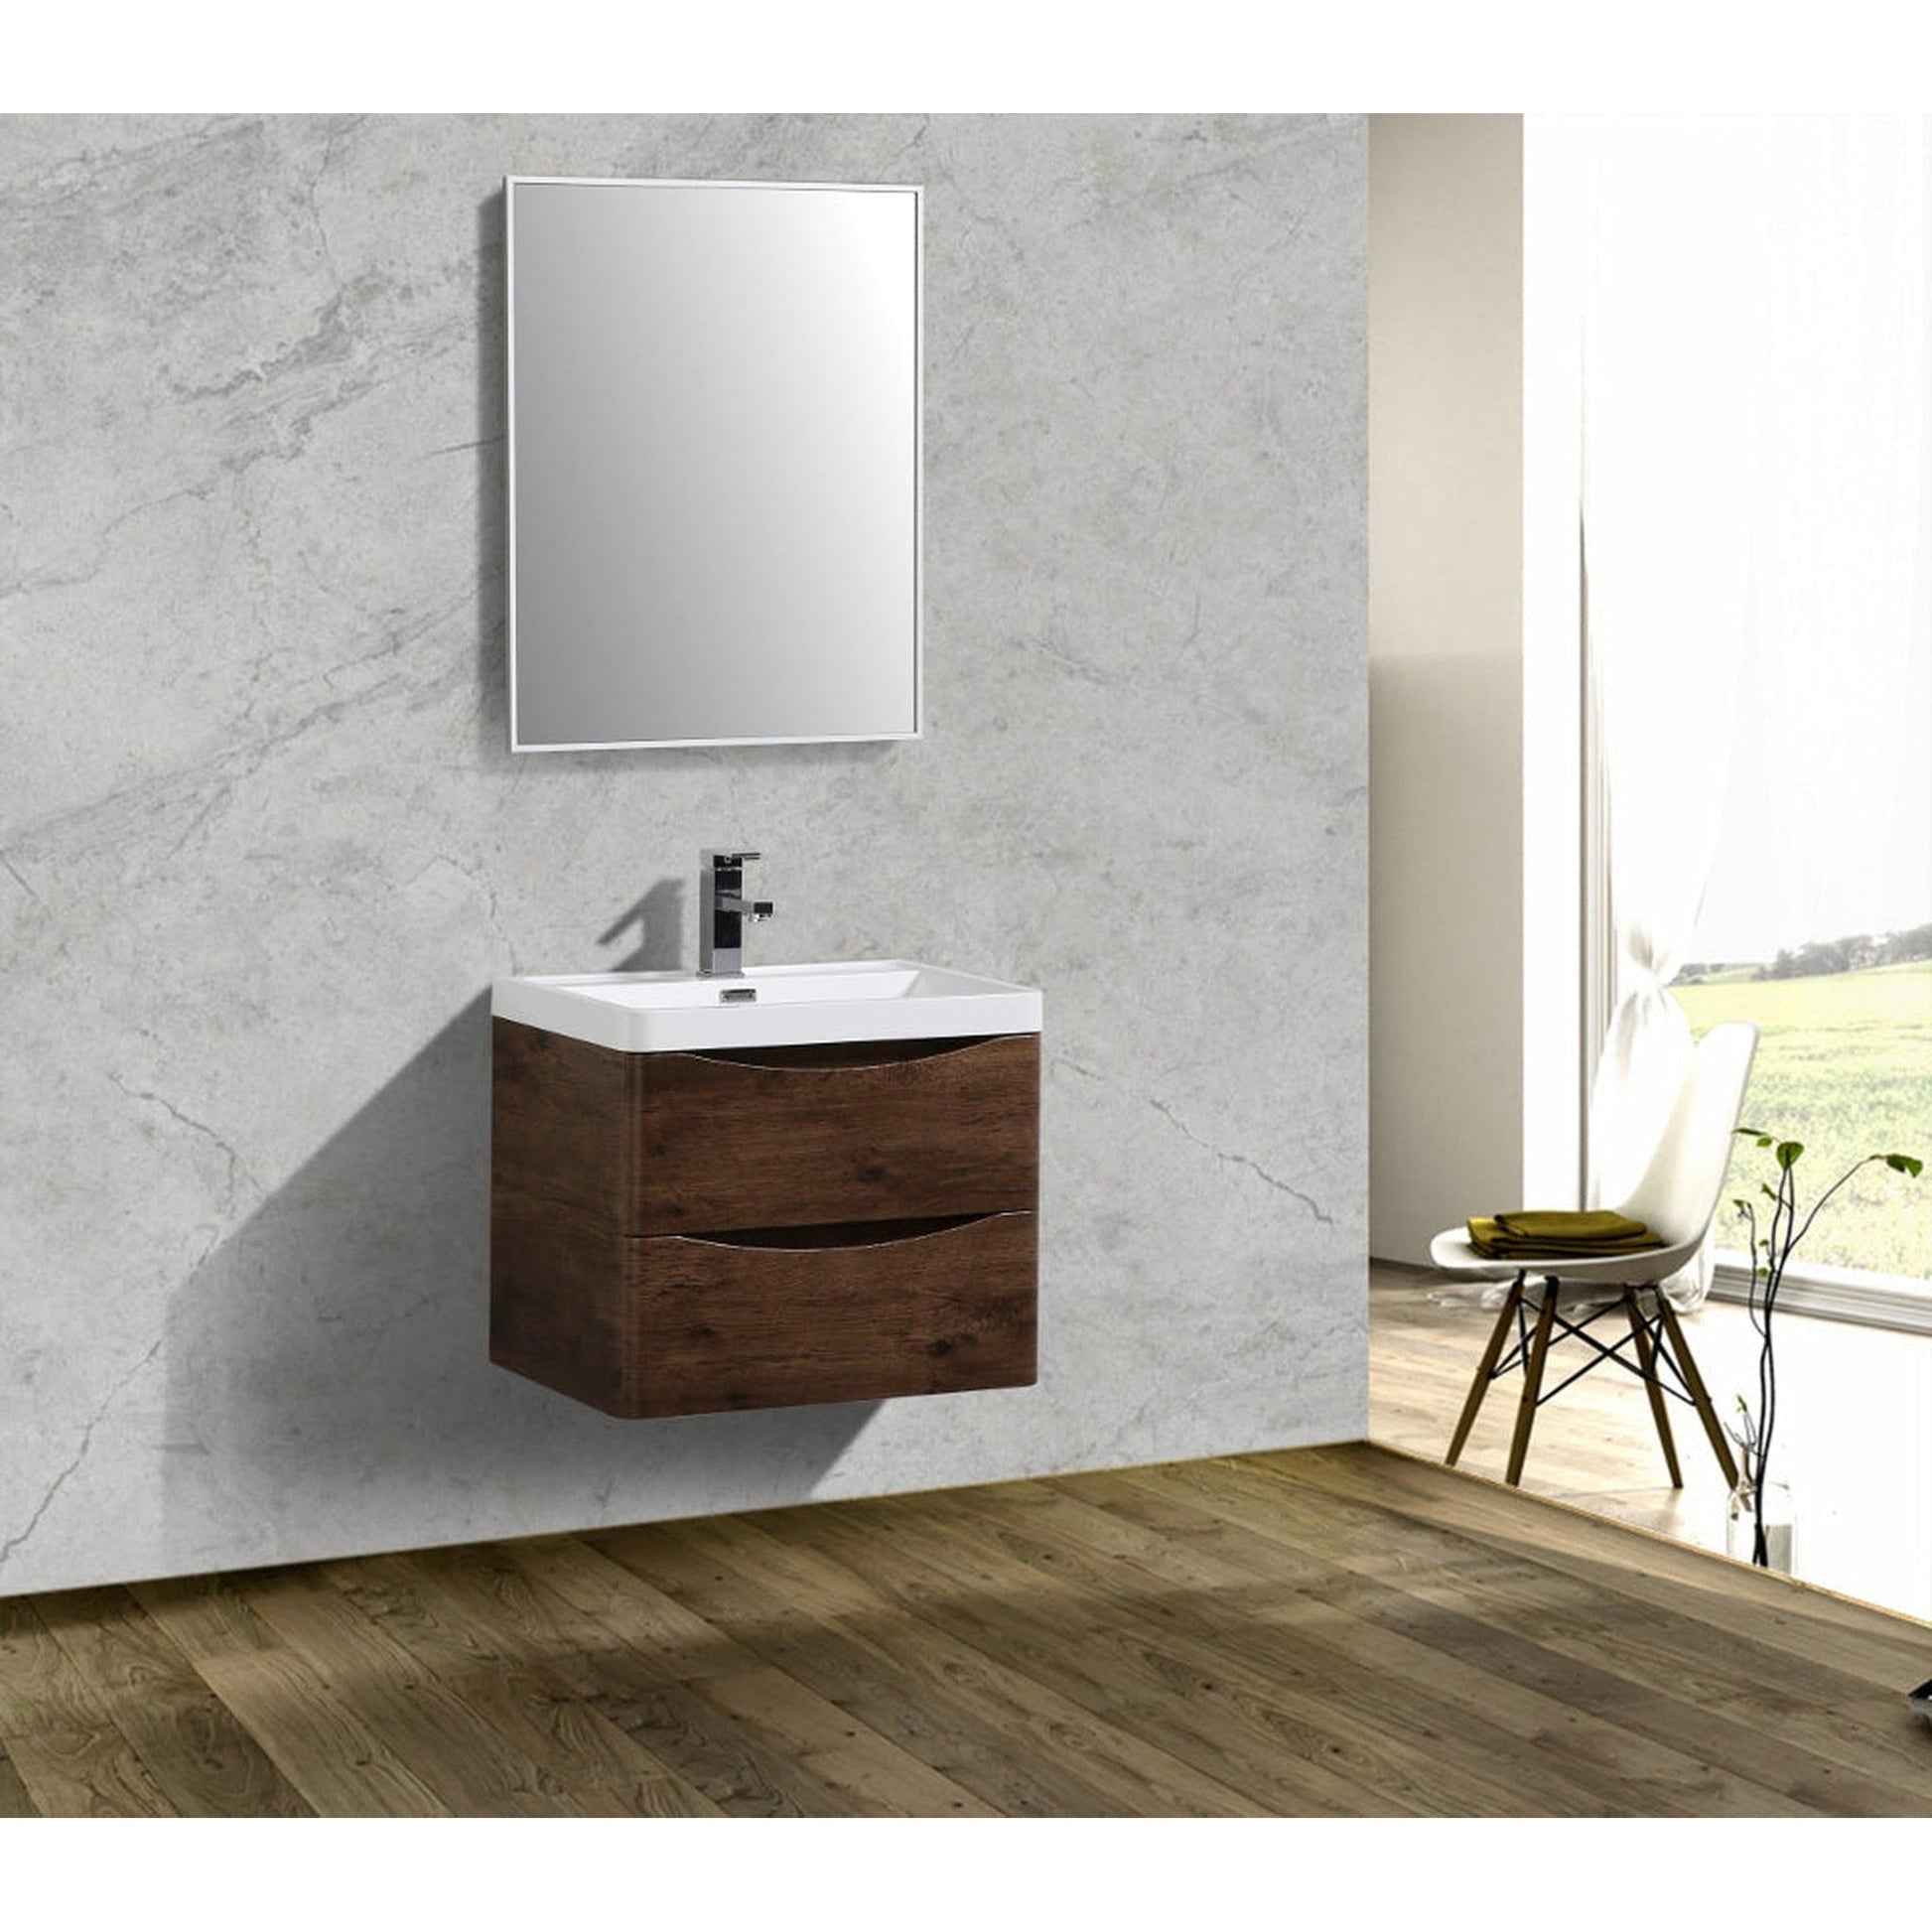 Eviva Smile 28" x 20" Rosewood Wall-Mounted Bathroom Vanity With White Single Integrated Sink